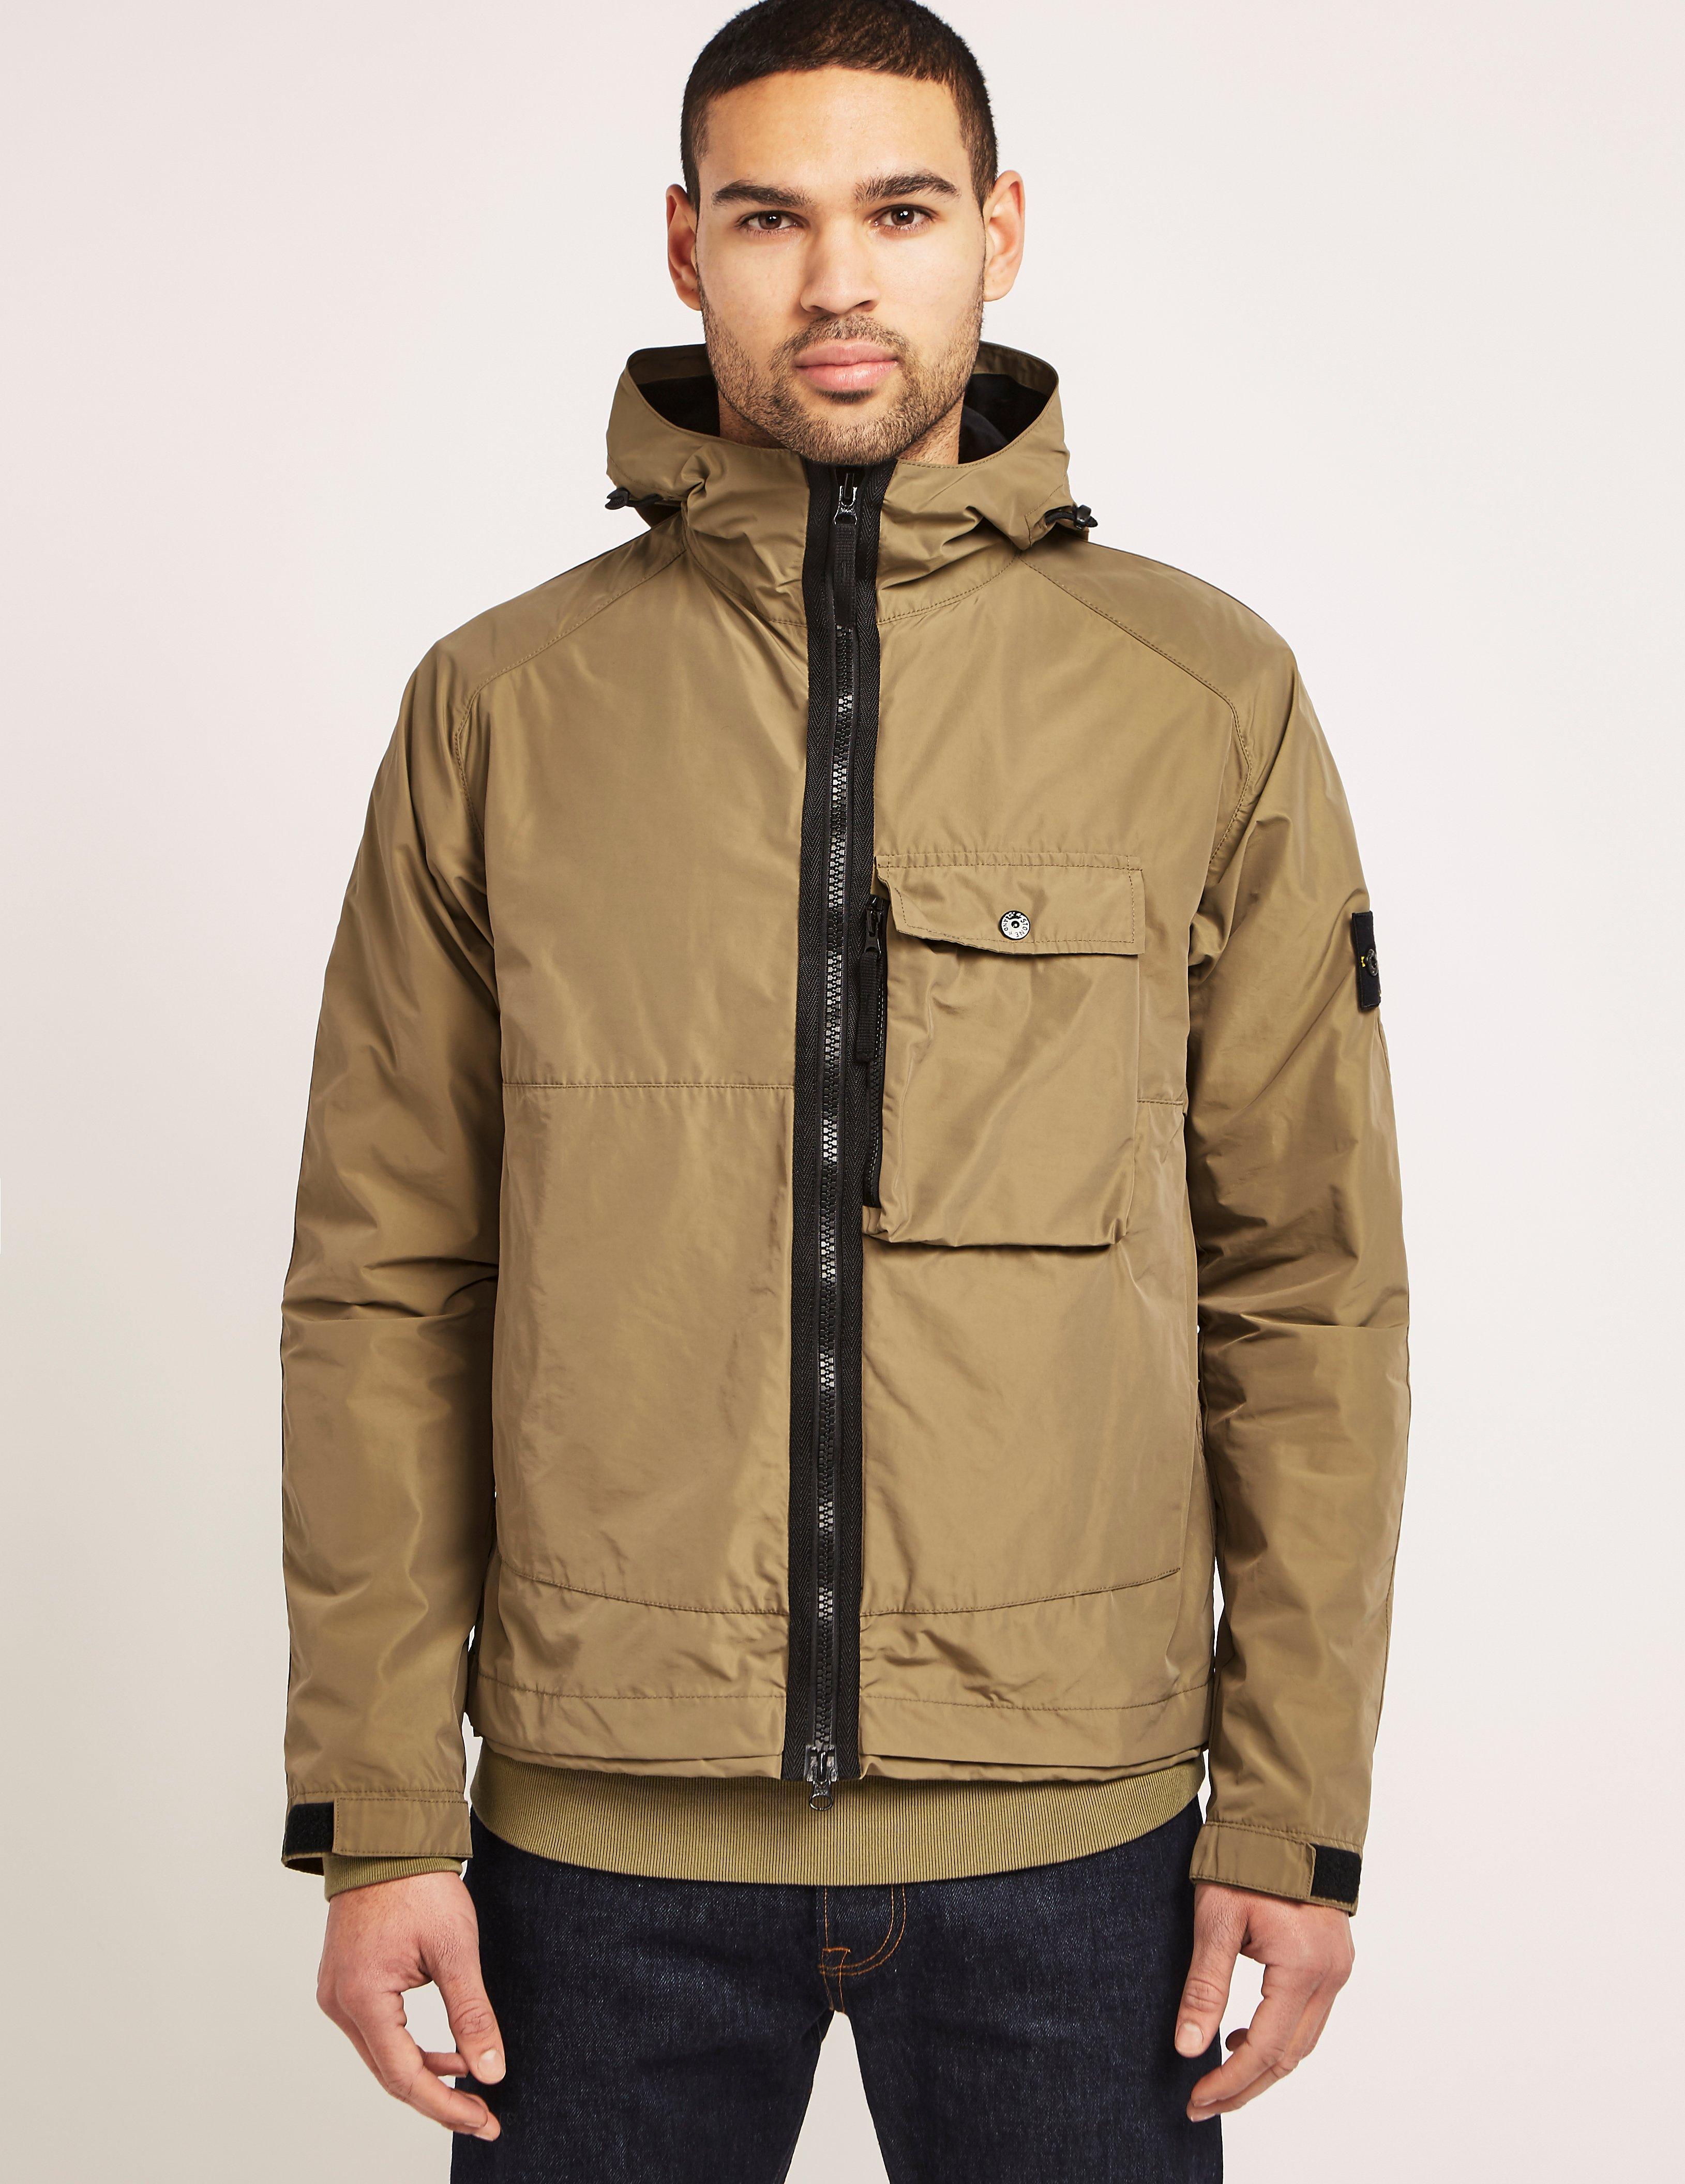 Stone Island Synthetic Micro Reps Hooded Jacket in Khaki (Natural) for Men  - Lyst